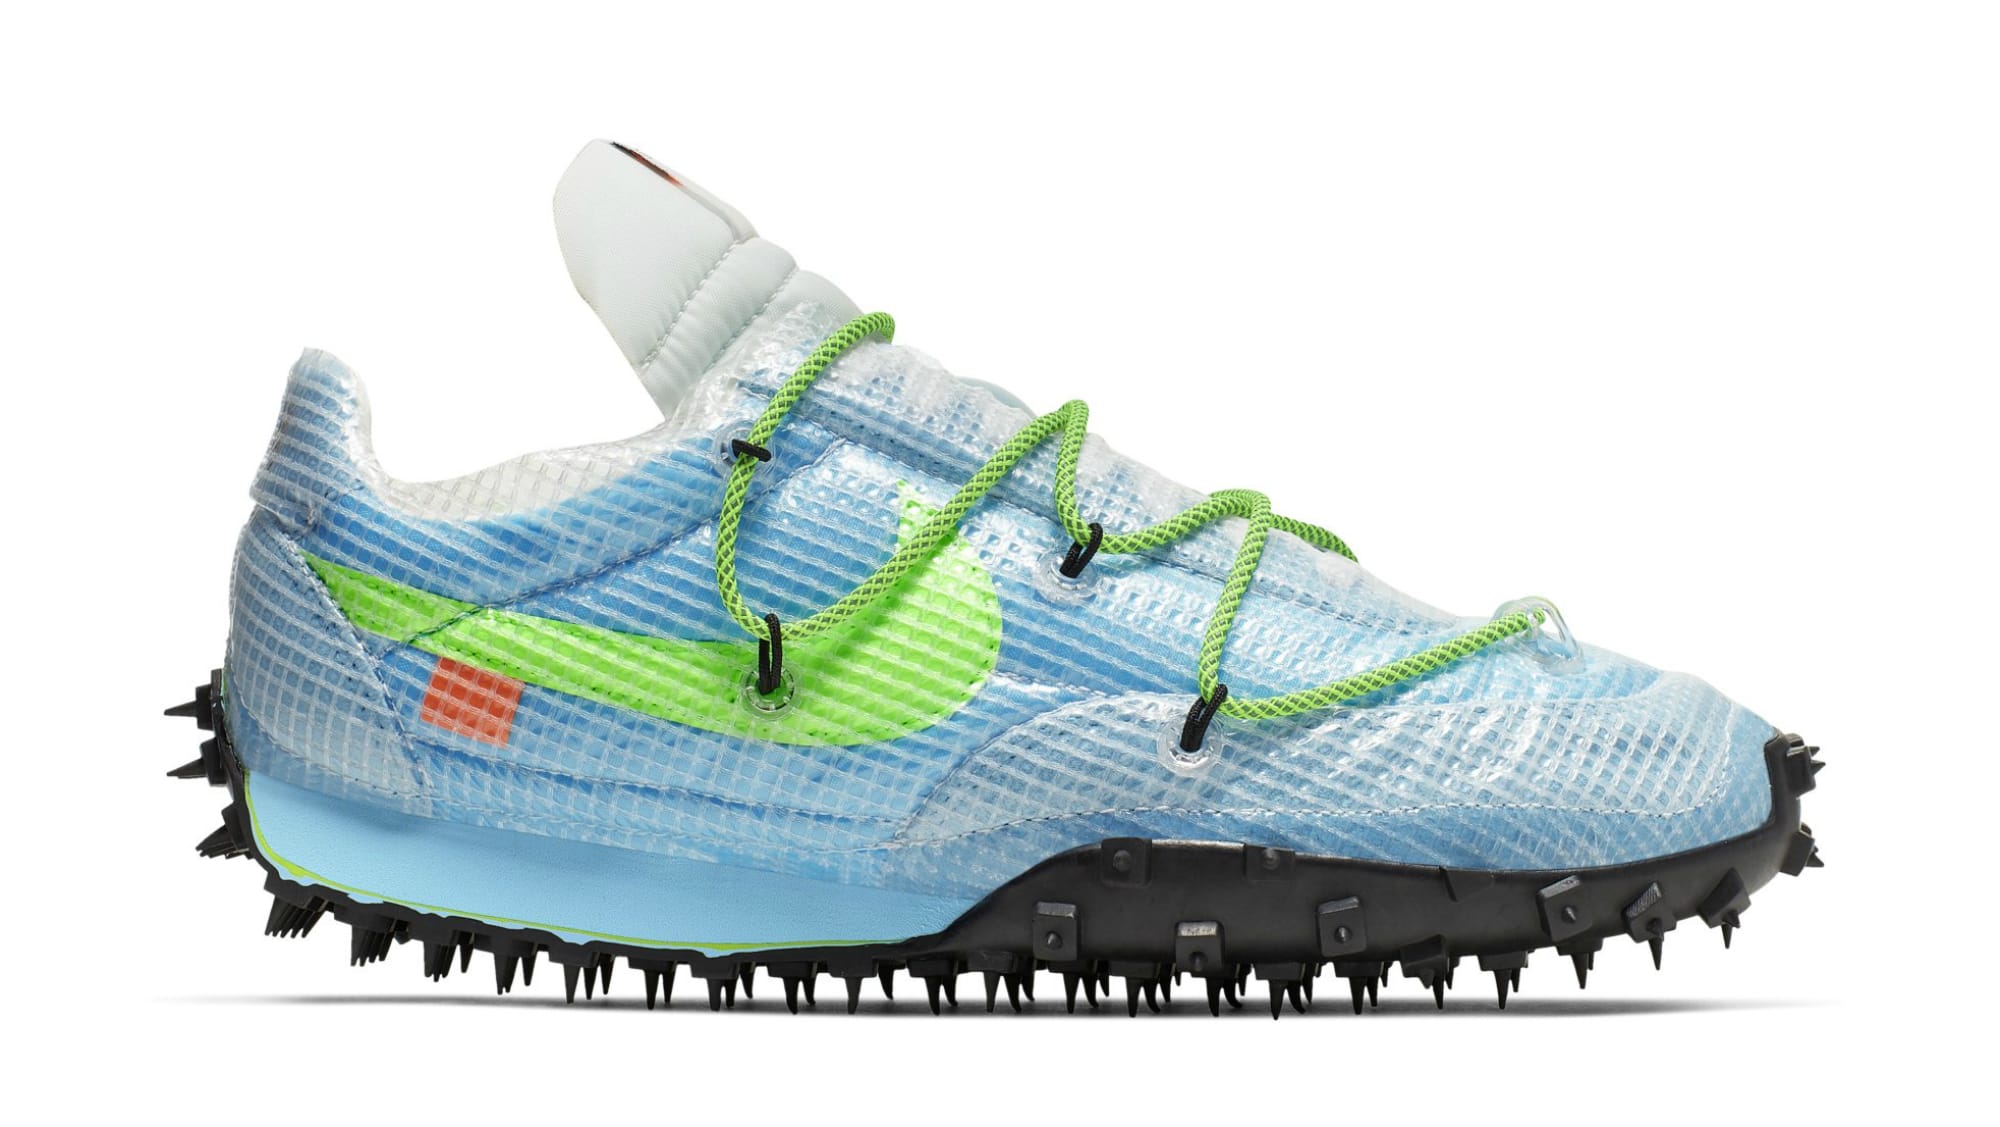 off-white-nike-waffle-racer-vivid-sky-cd8180-400-release-date